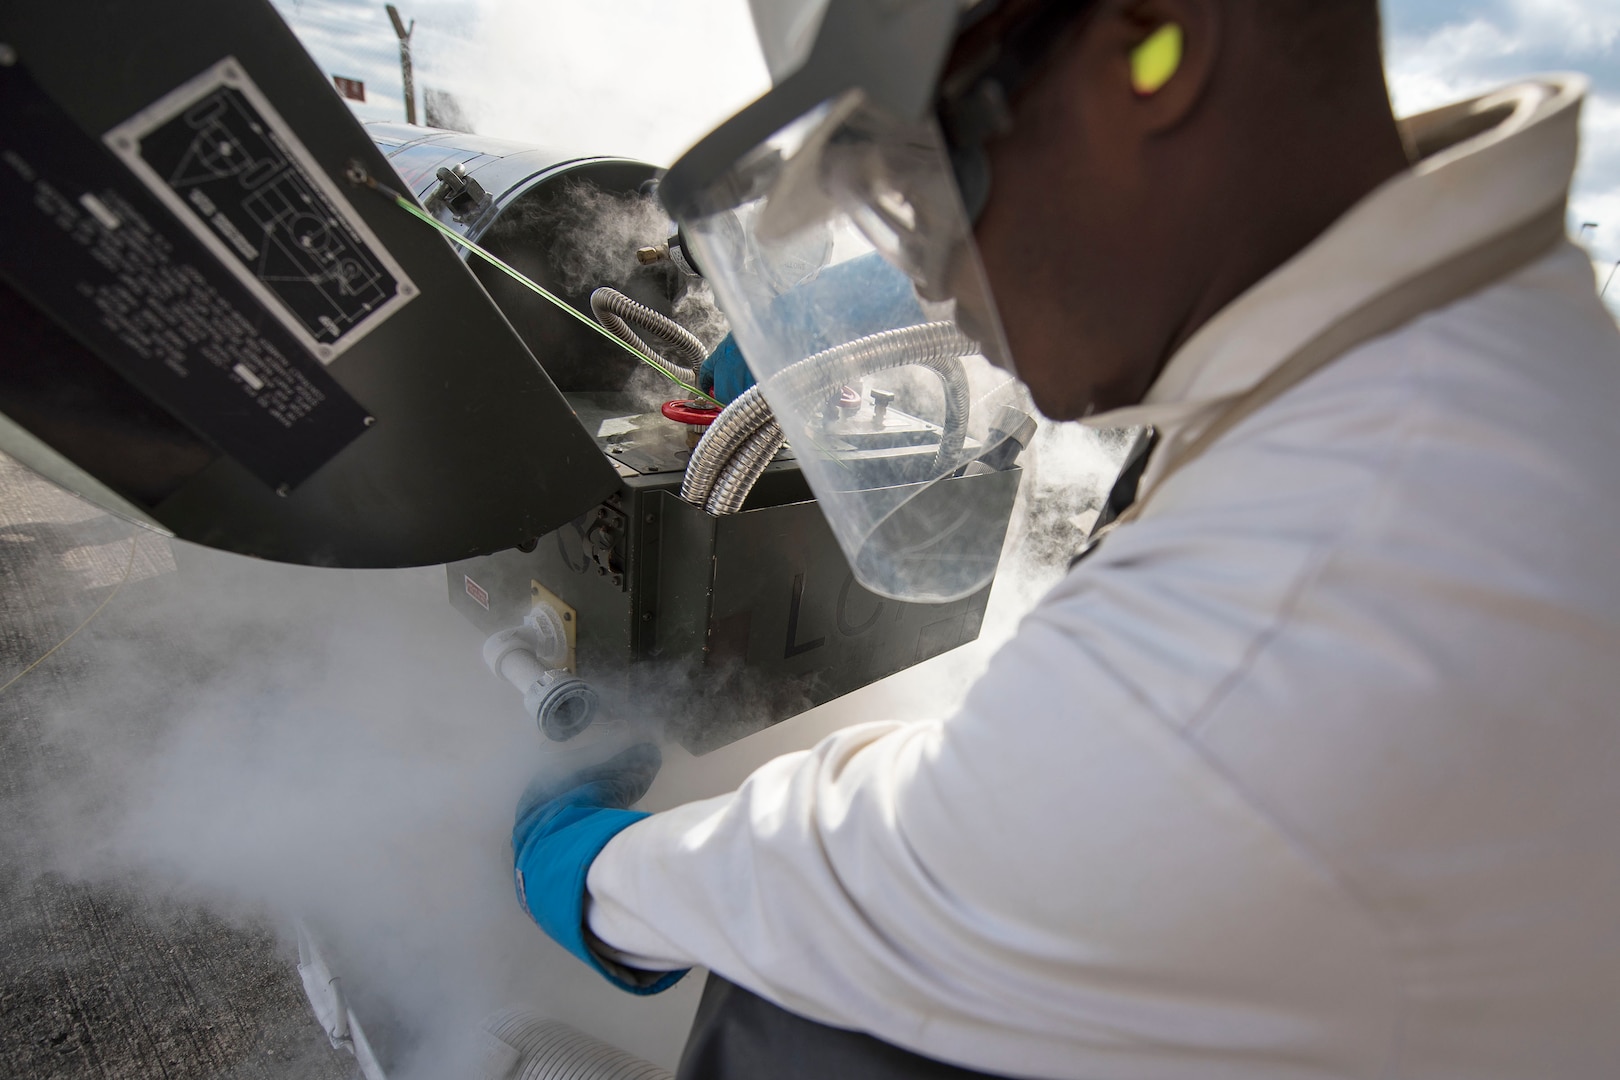 U.S. Air Force Senior Airman Kameron Ware, 100th Logistics Readiness Squadron Fuels Facilities operator, obtains a liquid oxygen sample from a LOX cart at RAF Mildenhall, England, Oct. 2, 2018. Fuels facilities Airmen ensure aircraft and government vehicles can receive fuel, maintain fuels facilities on the base, and ensure that liquid oxygen is kept at the highest level of purity. (U.S. Air Force photo by Staff Sgt. Christine Groening)